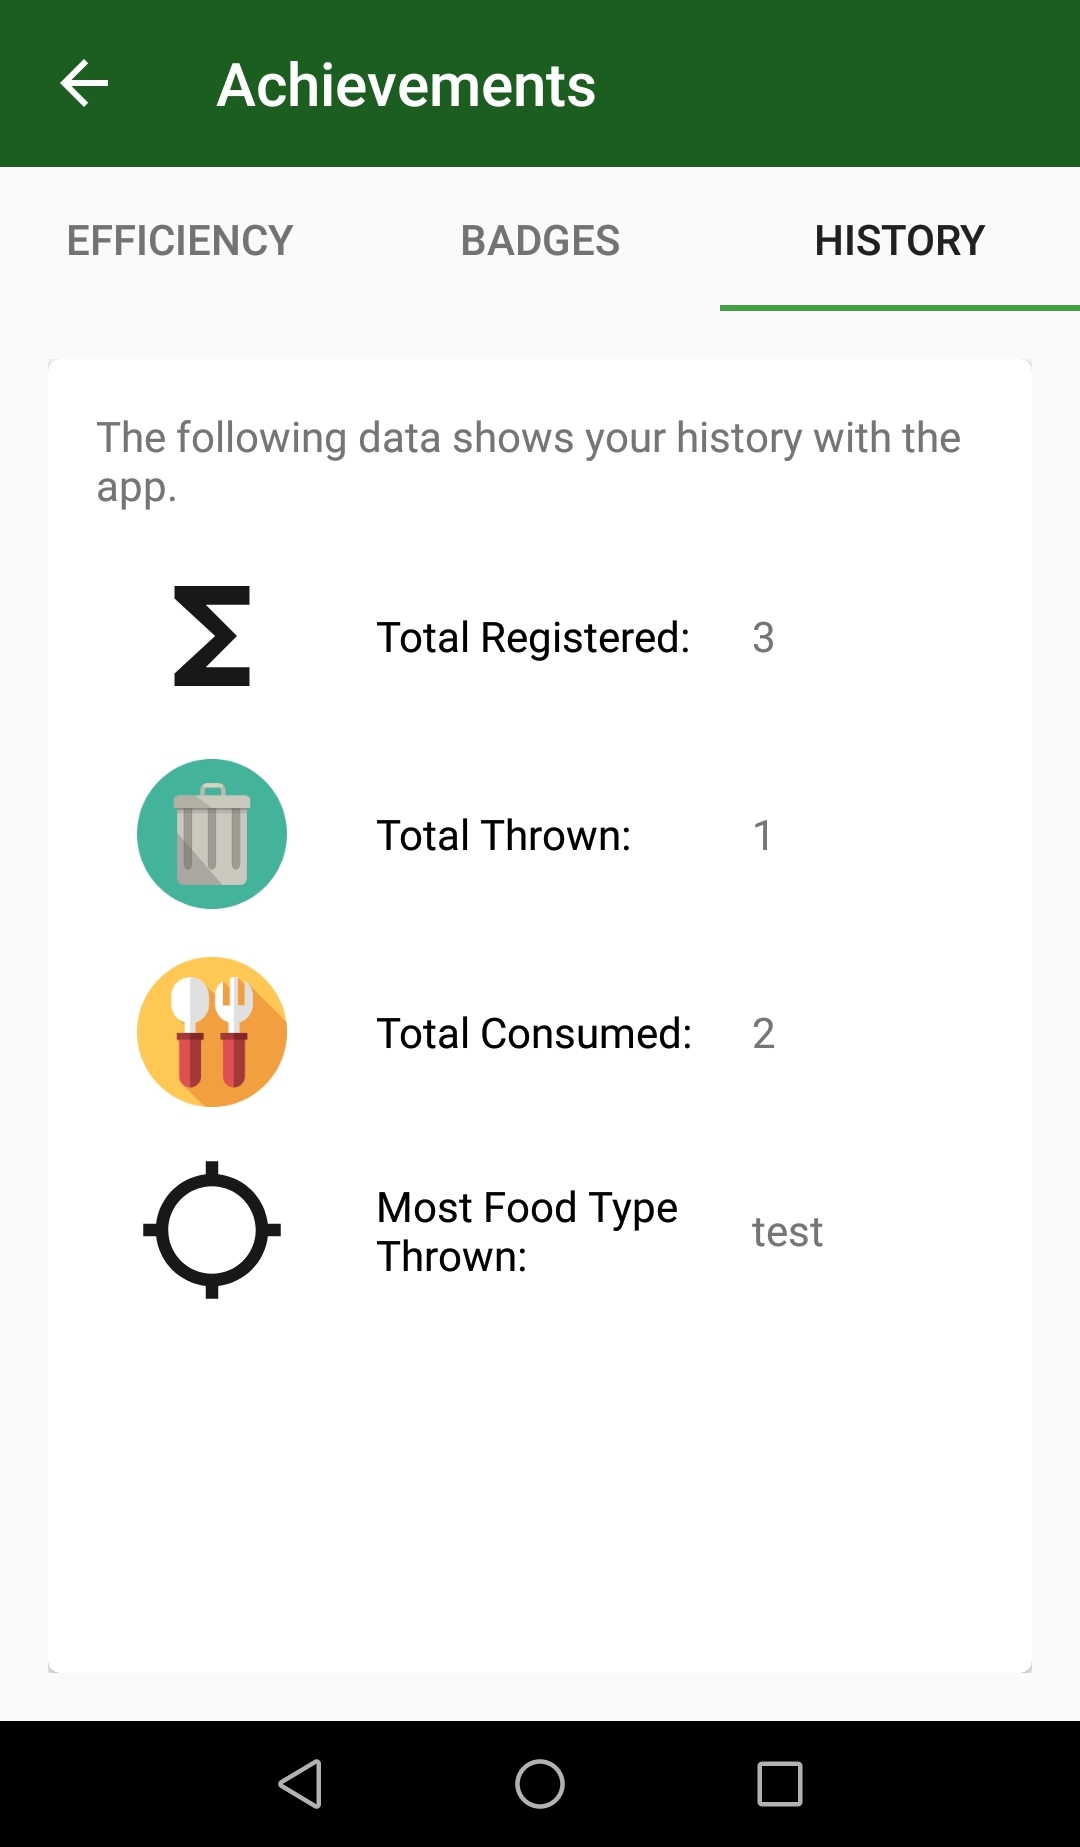 Displays 
                the amount of food the user has registered, thrown, consumed and the type of food the user has thrown 
                out the most.